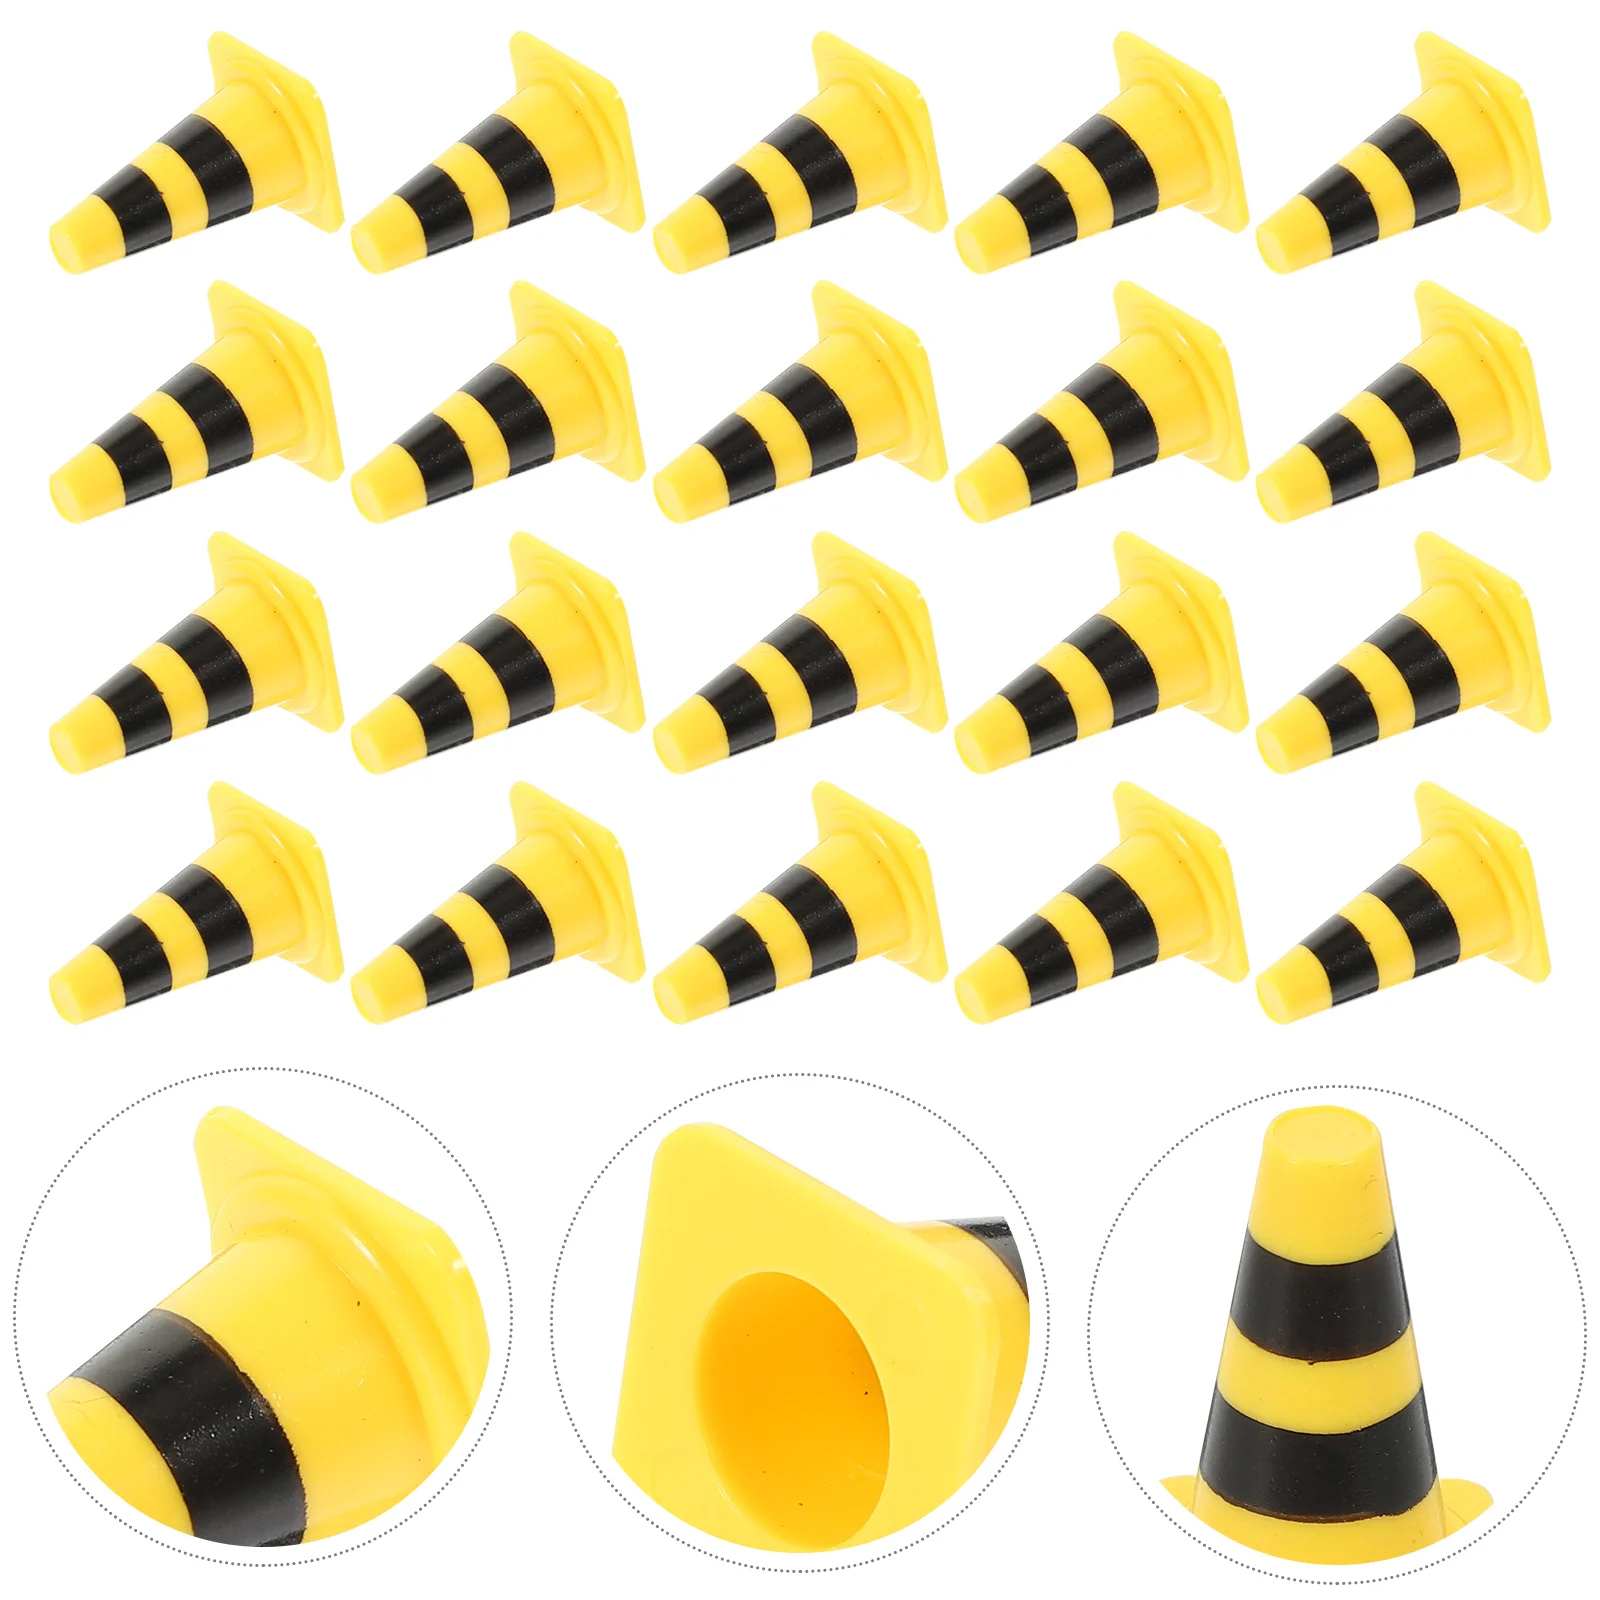 30pcs Miniature Traffic Cones Roadblock Sign Toy Kids Traffic Cognitive Toys useful road sign toy lovely easy to store children roadblock sign model children toy model roadblock model 10pcs